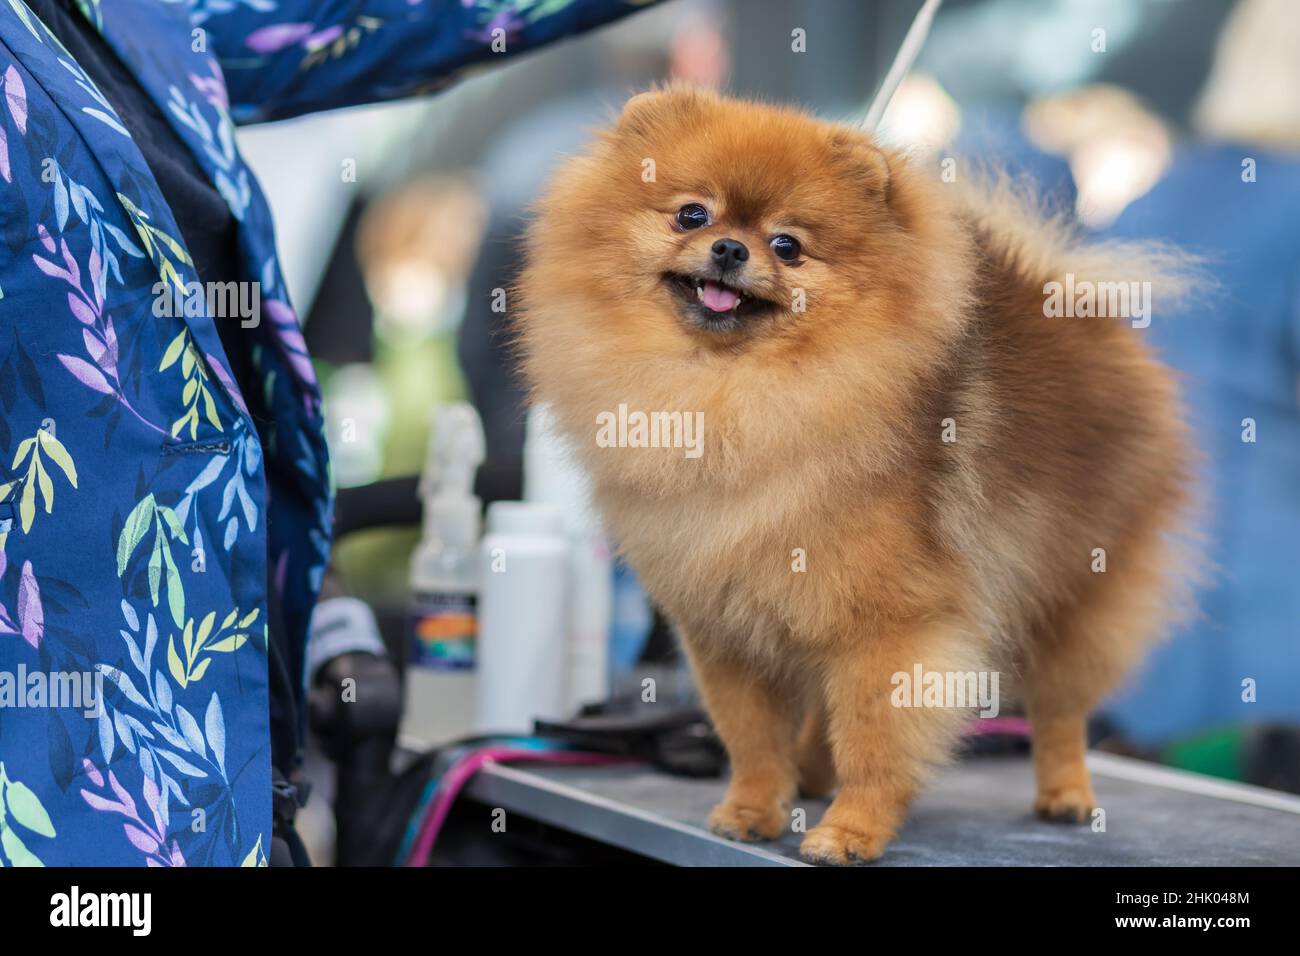 A small breed of brown Pomeranian dog stands on the table. Stock Photo